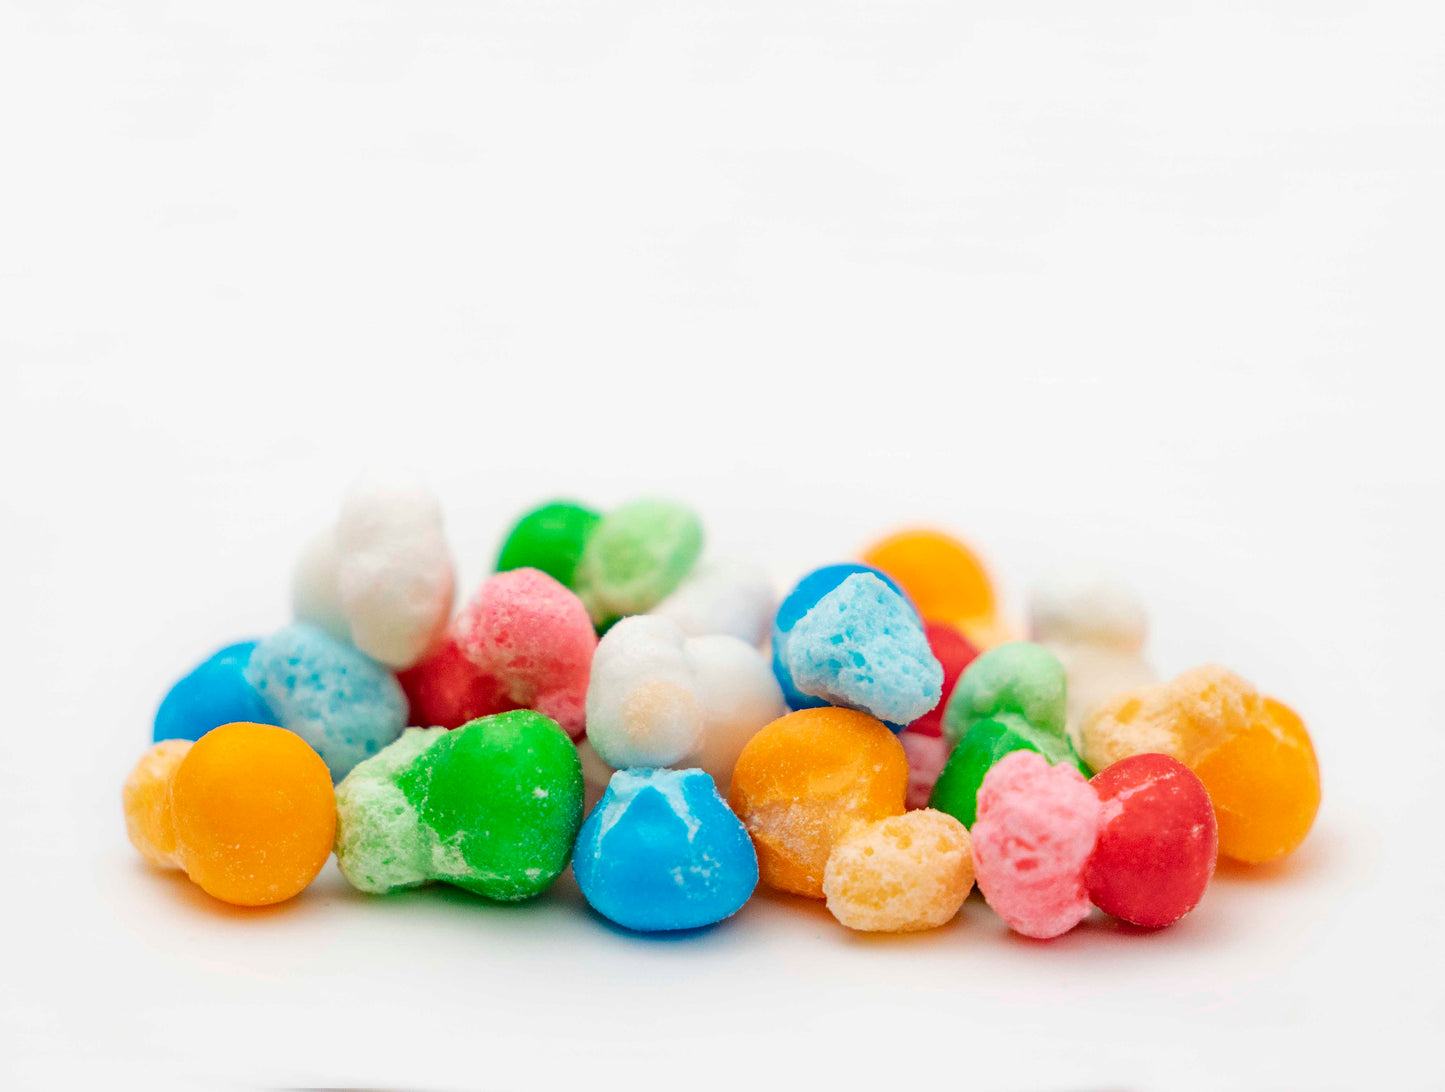 Freeze Dried Ditzy Puffs™ are made using Air Heads® bites